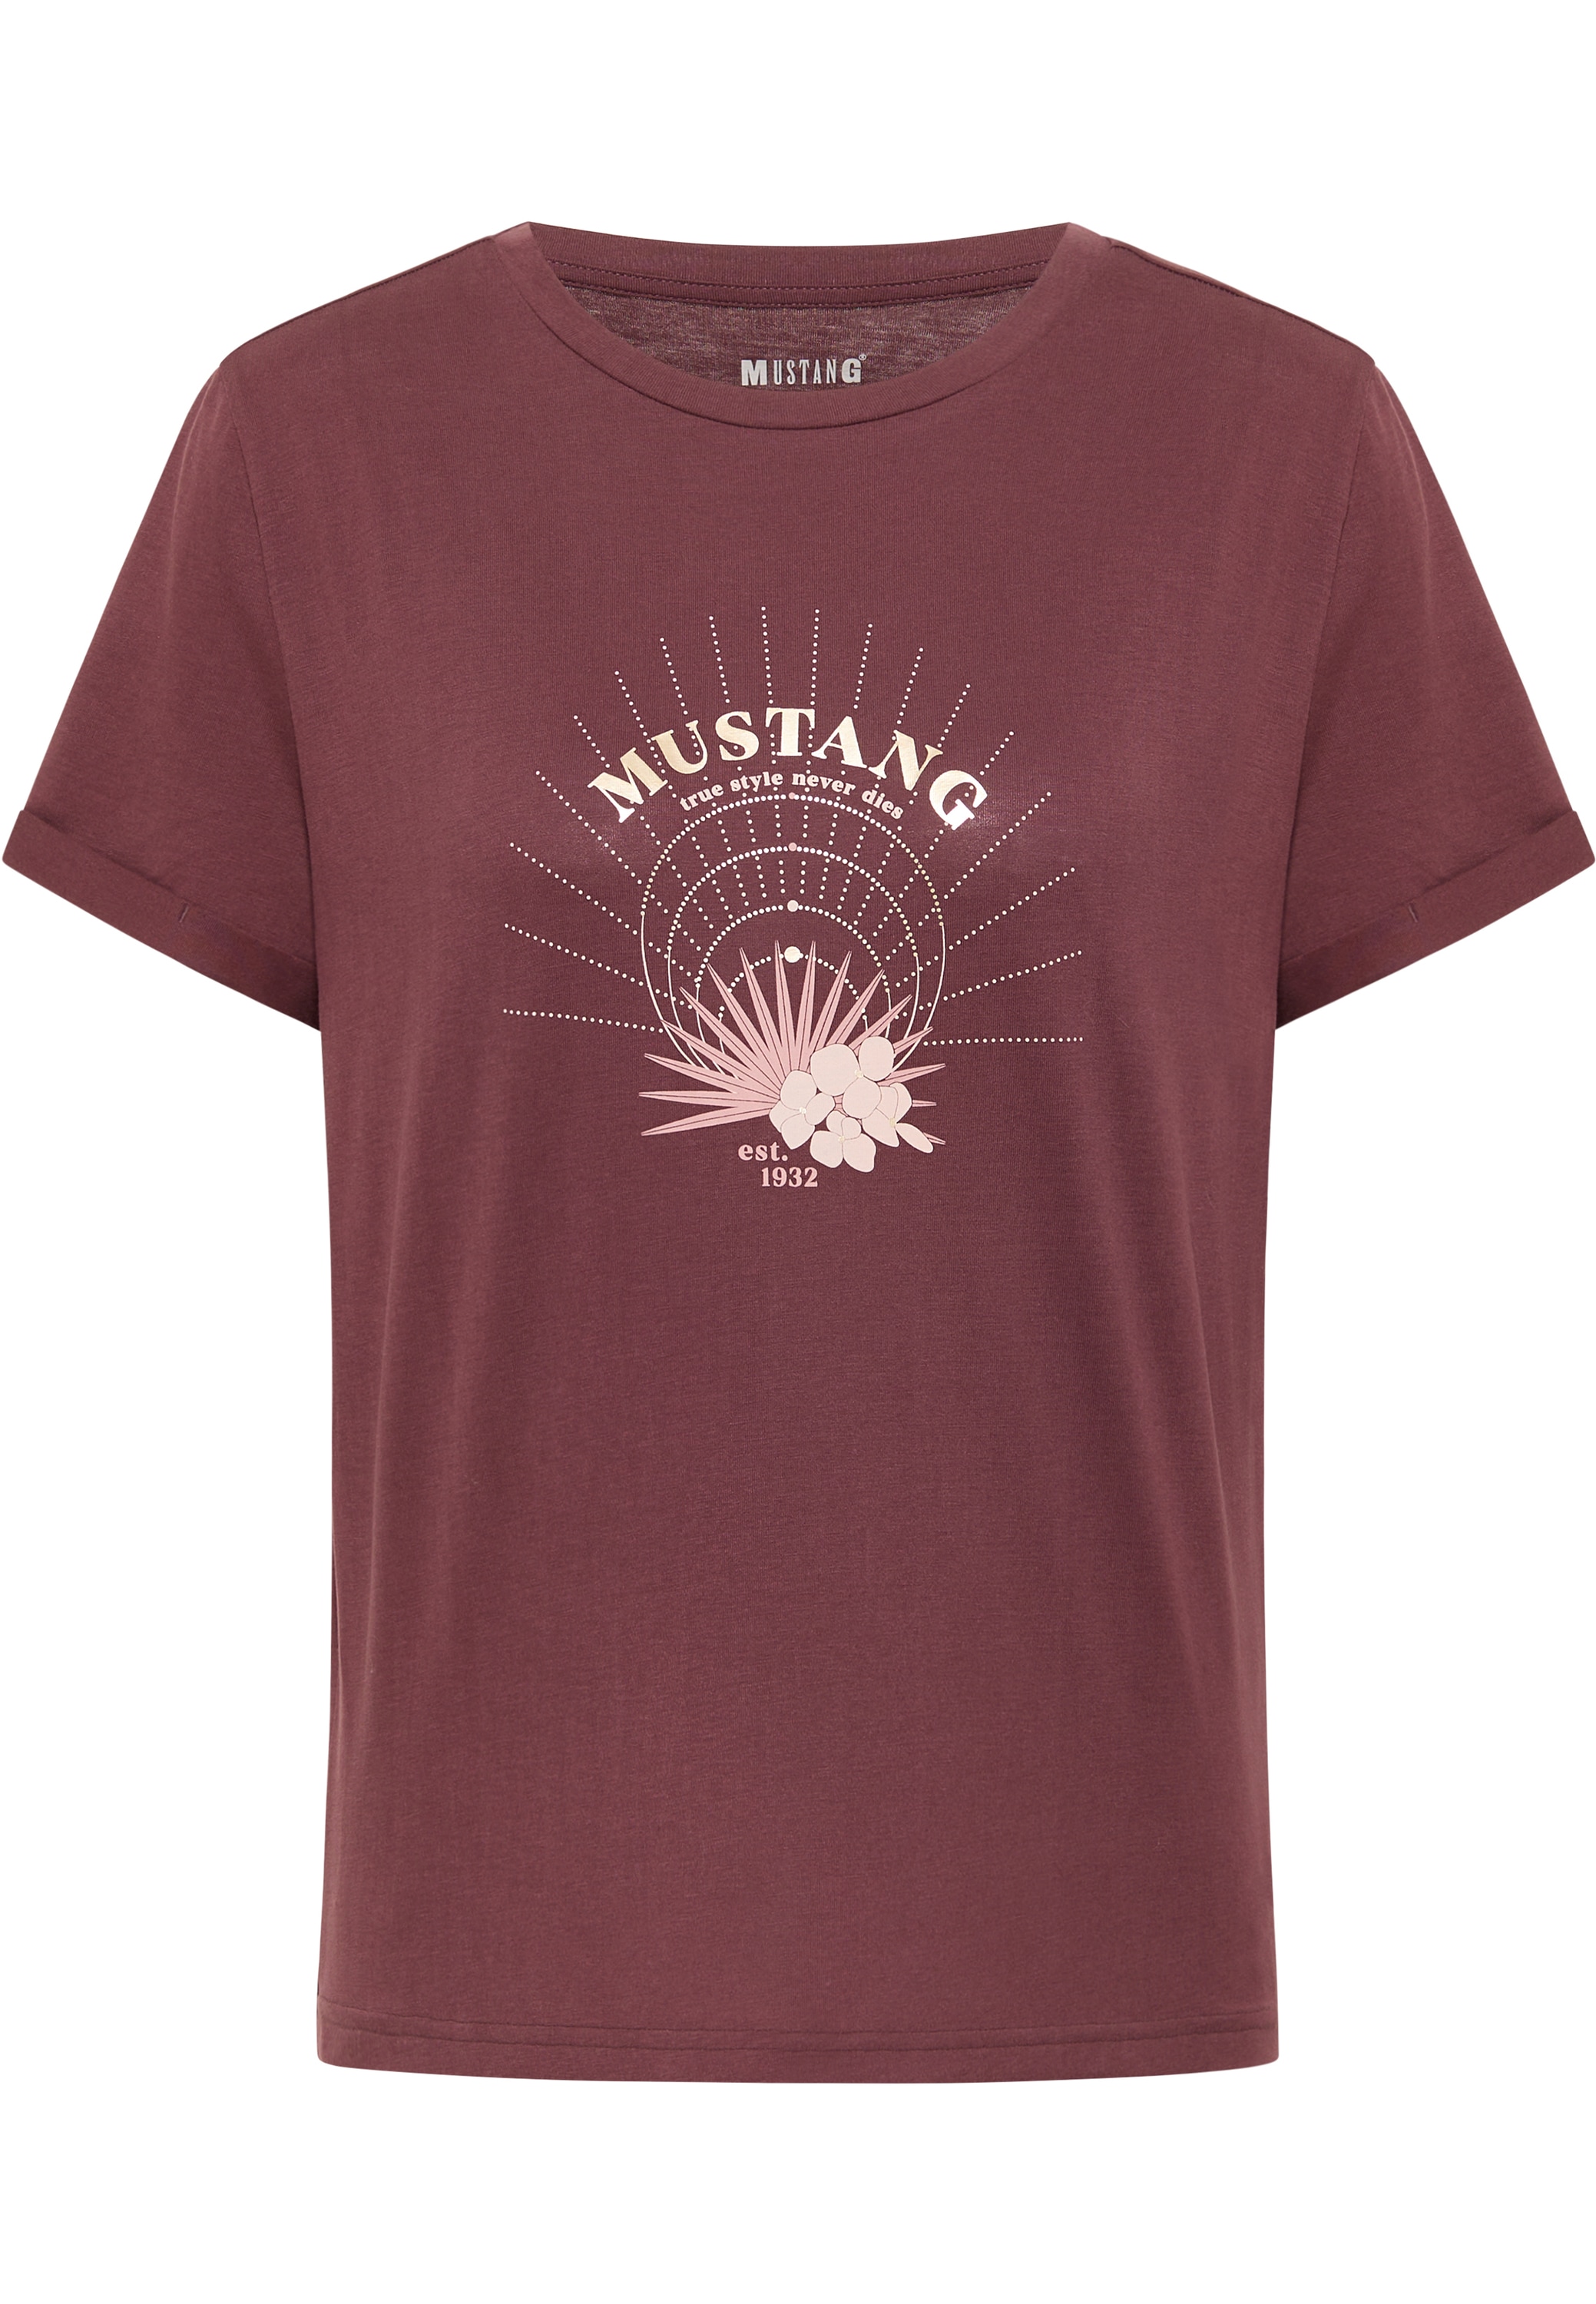 MUSTANG T-Shirt »Style Alina C bei Foil« OTTOversand